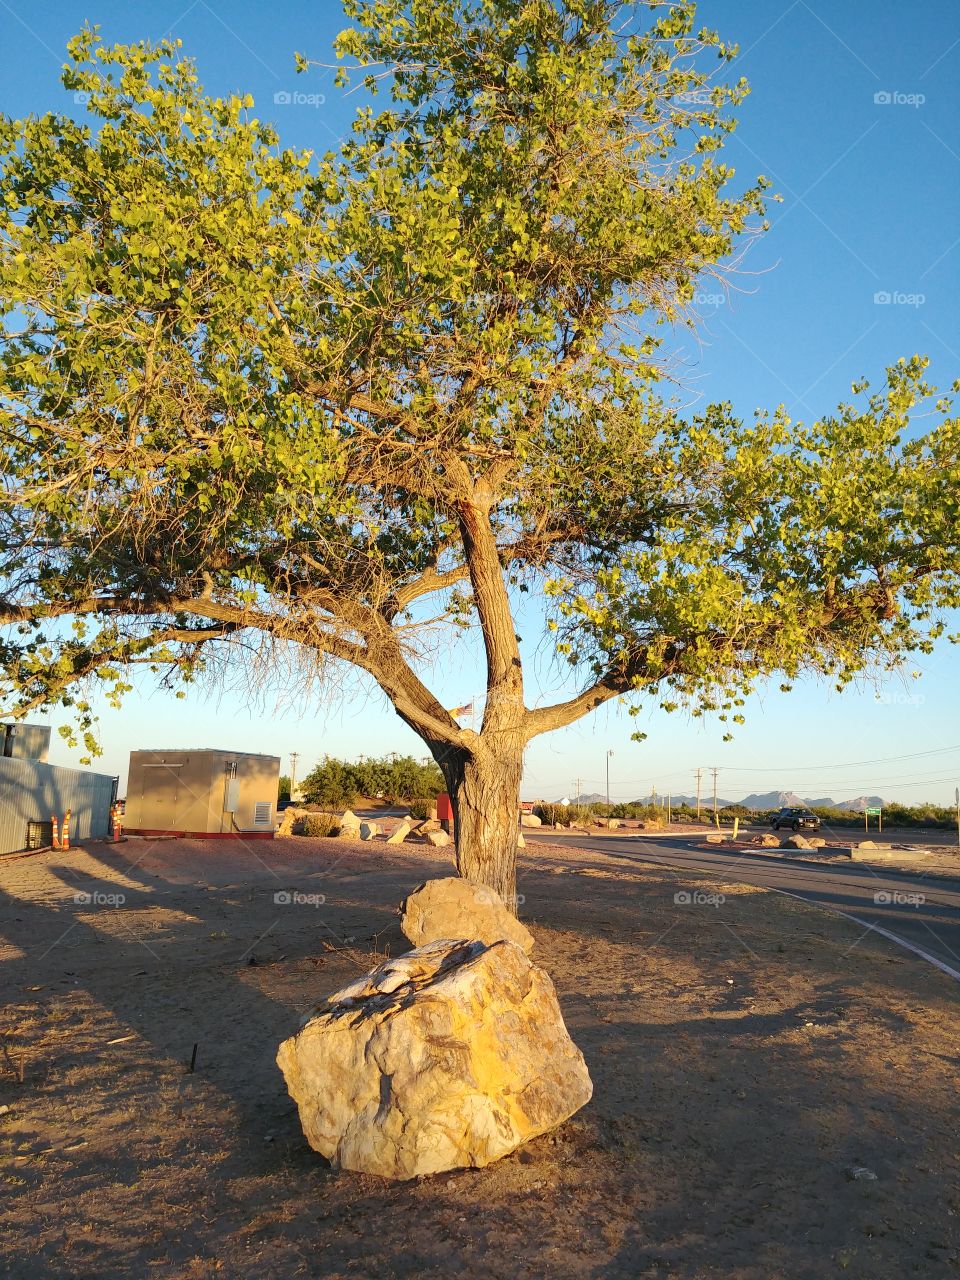 Rock and tree in sunset